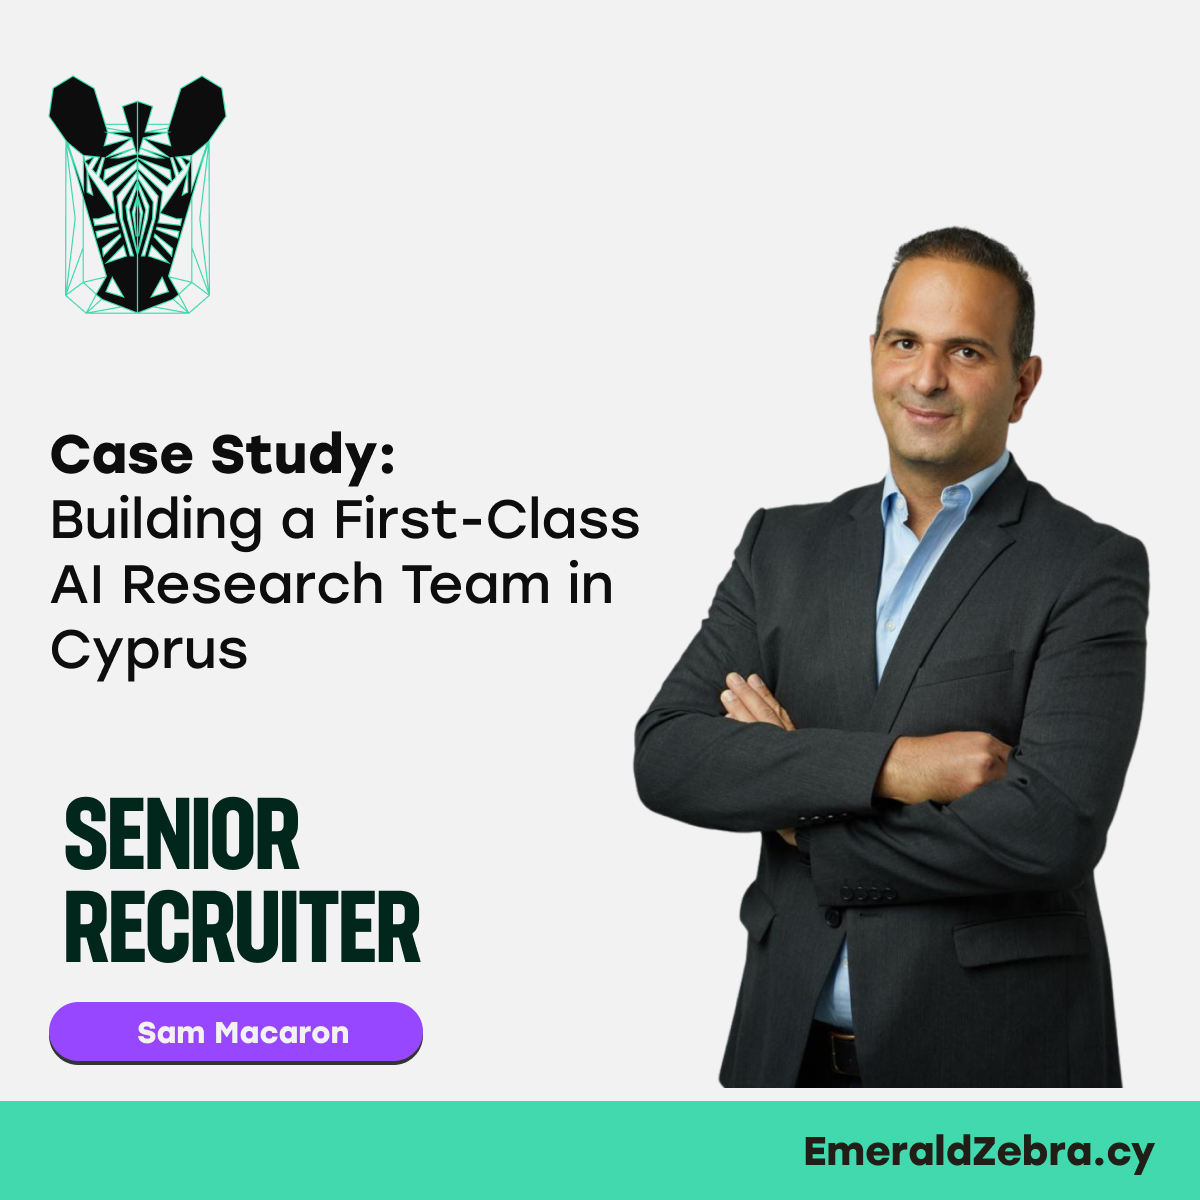 Case Study: Building a First-Class AI Research Team in Cyprus